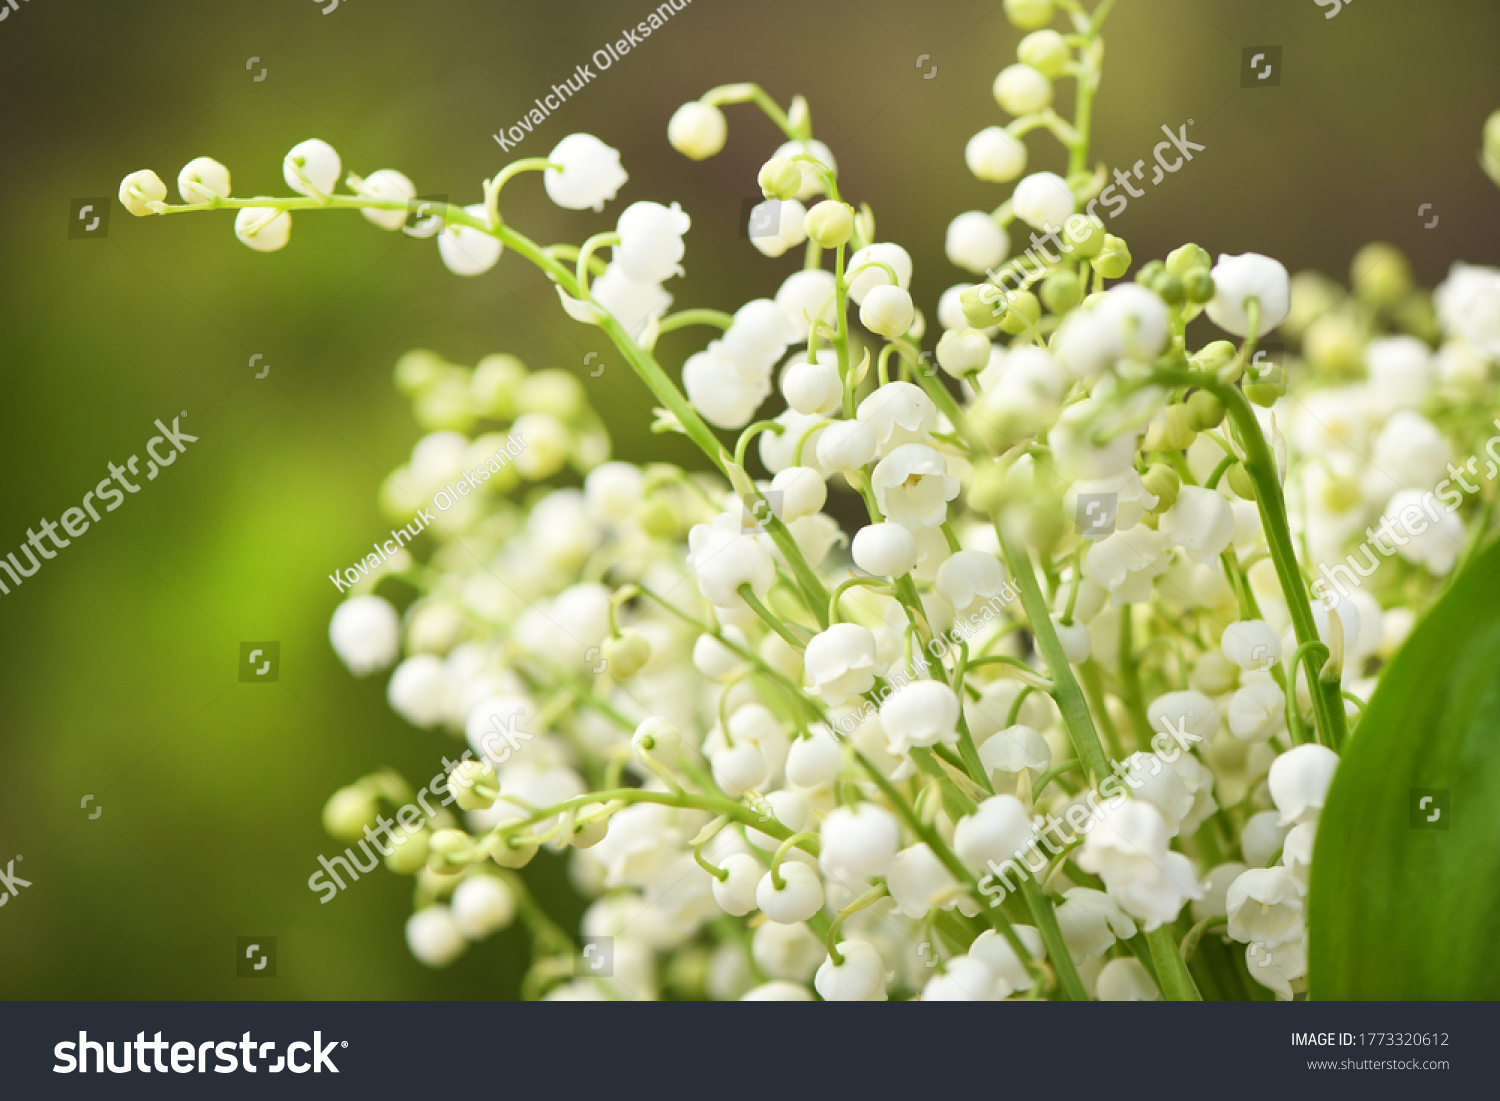 Lily of the valley flowers. Natural background with blooming lilies of the valley. High resolution photo. Selective focus. #1773320612